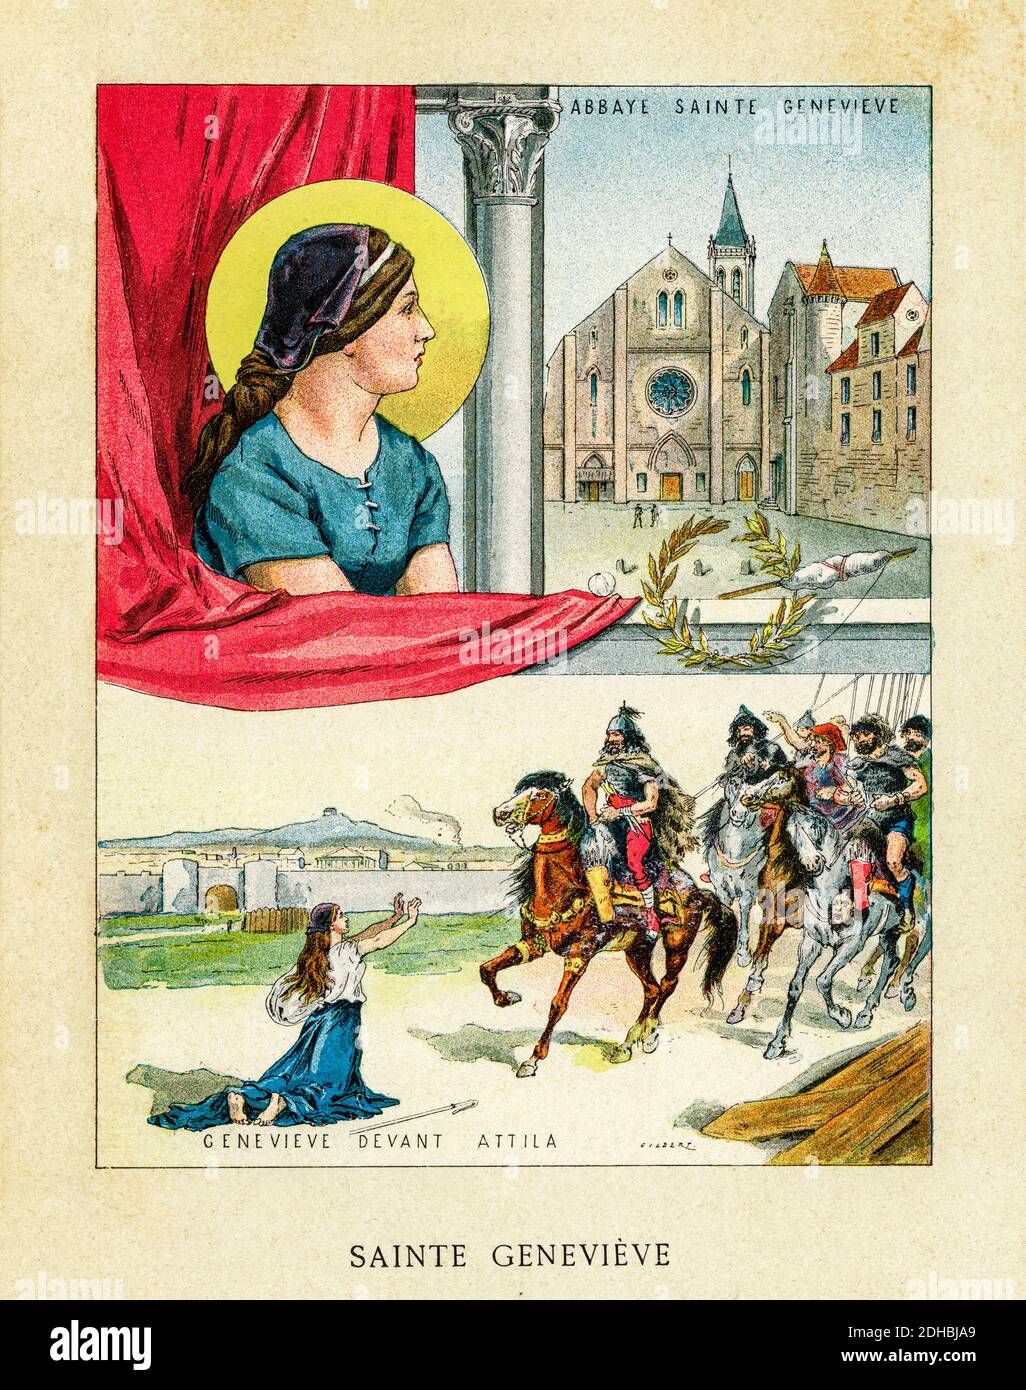 Old color lithography portrait of Saint Genevieve of Paris (422-512) Sainte Genevieve, french nun and saint. The abbaye Sainte Genevieve. Sainte Genevieve implores Attila to be merciful and spare the city of Paris. France. Les Français Illustres by Gustave Demoulin 1897 Stock Photo